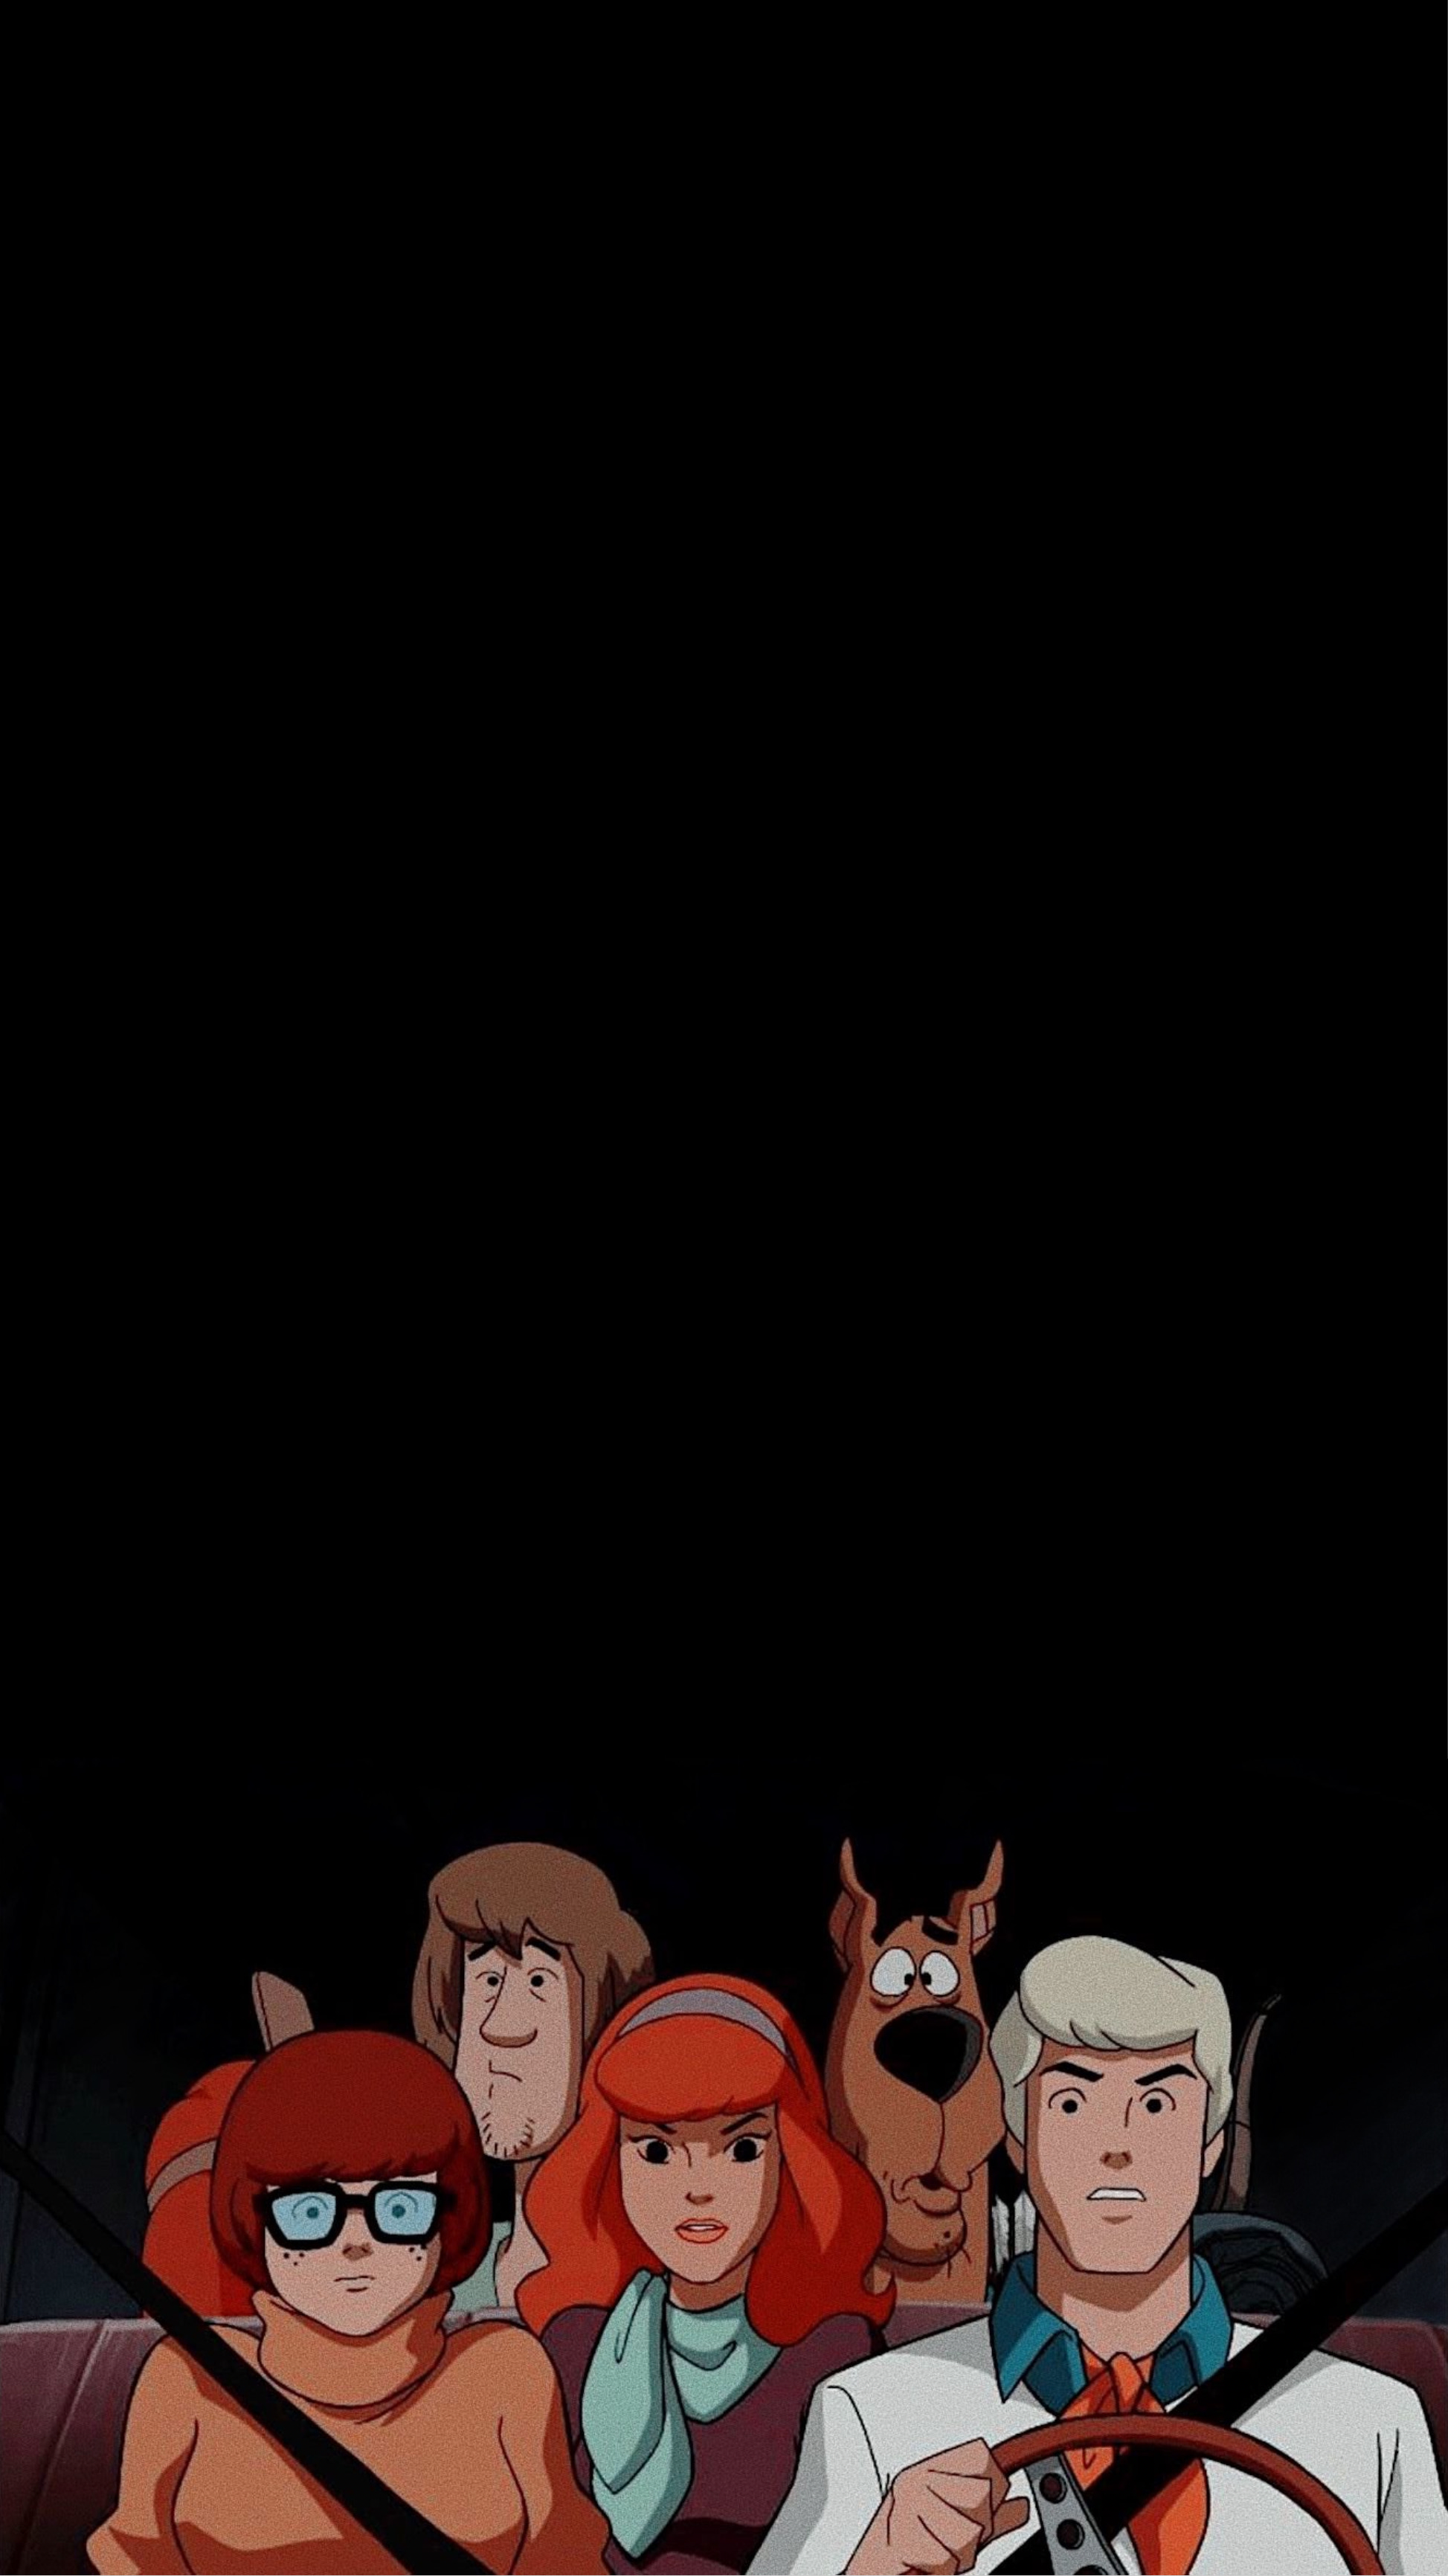 Wanted A Scooby Doo Wallpaper For My Phone, Decided - Scooby Doo Wallpaper Iphone , HD Wallpaper & Backgrounds